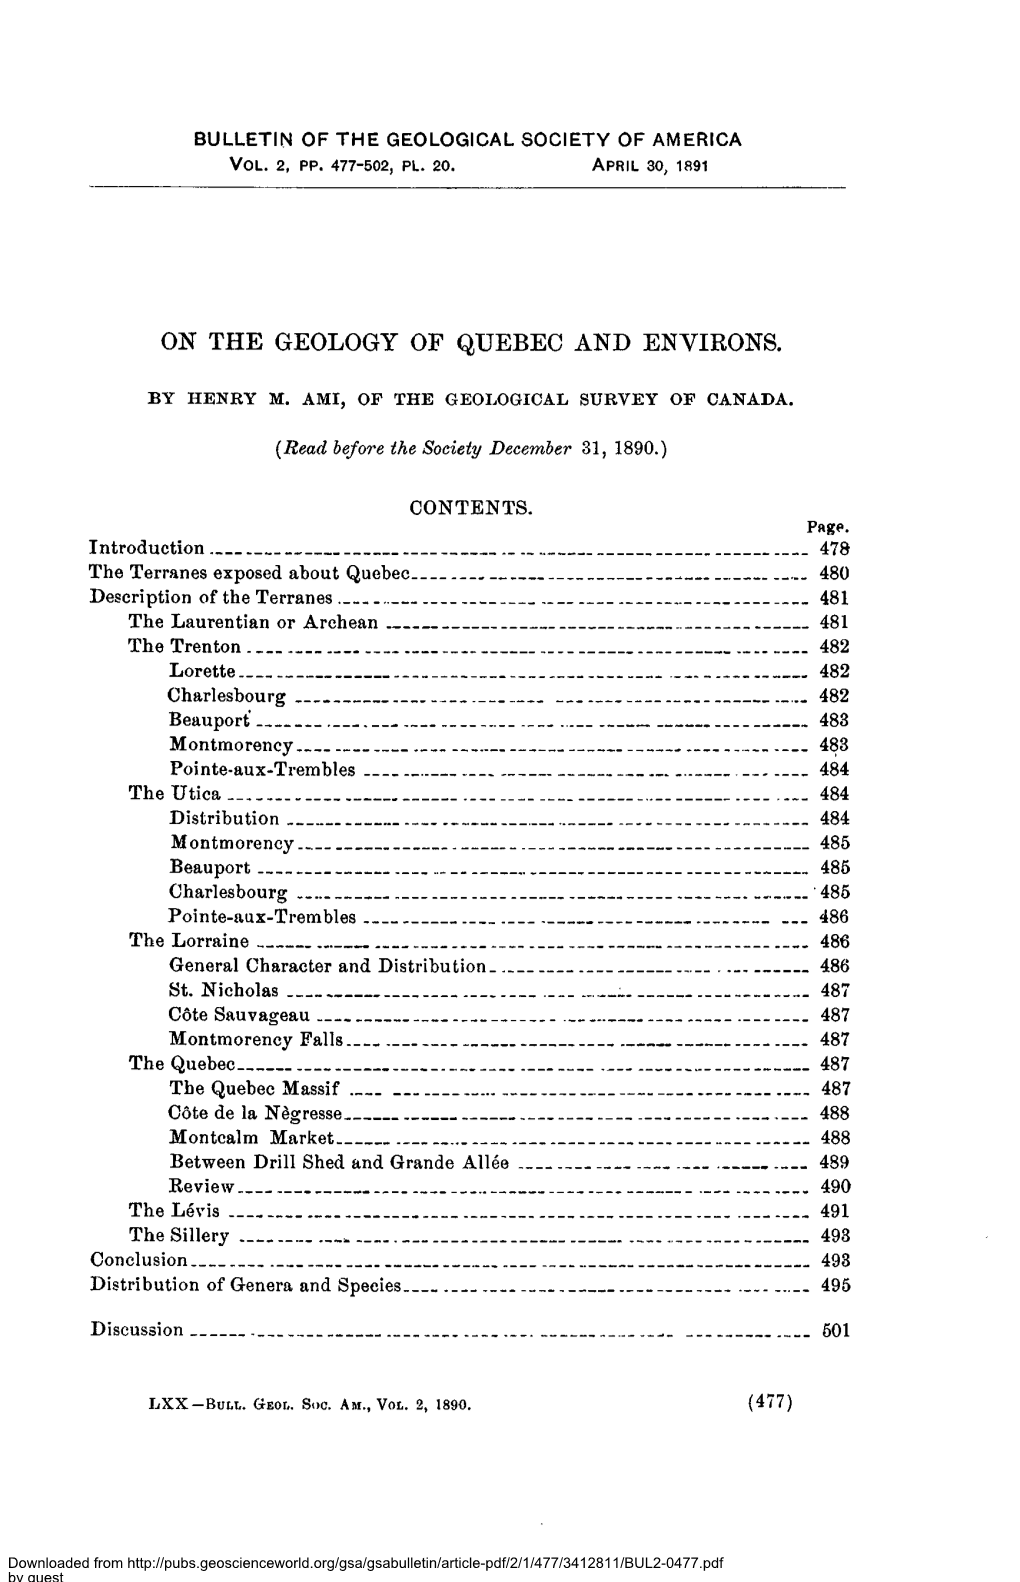 On the Geology of Quebec and Environs